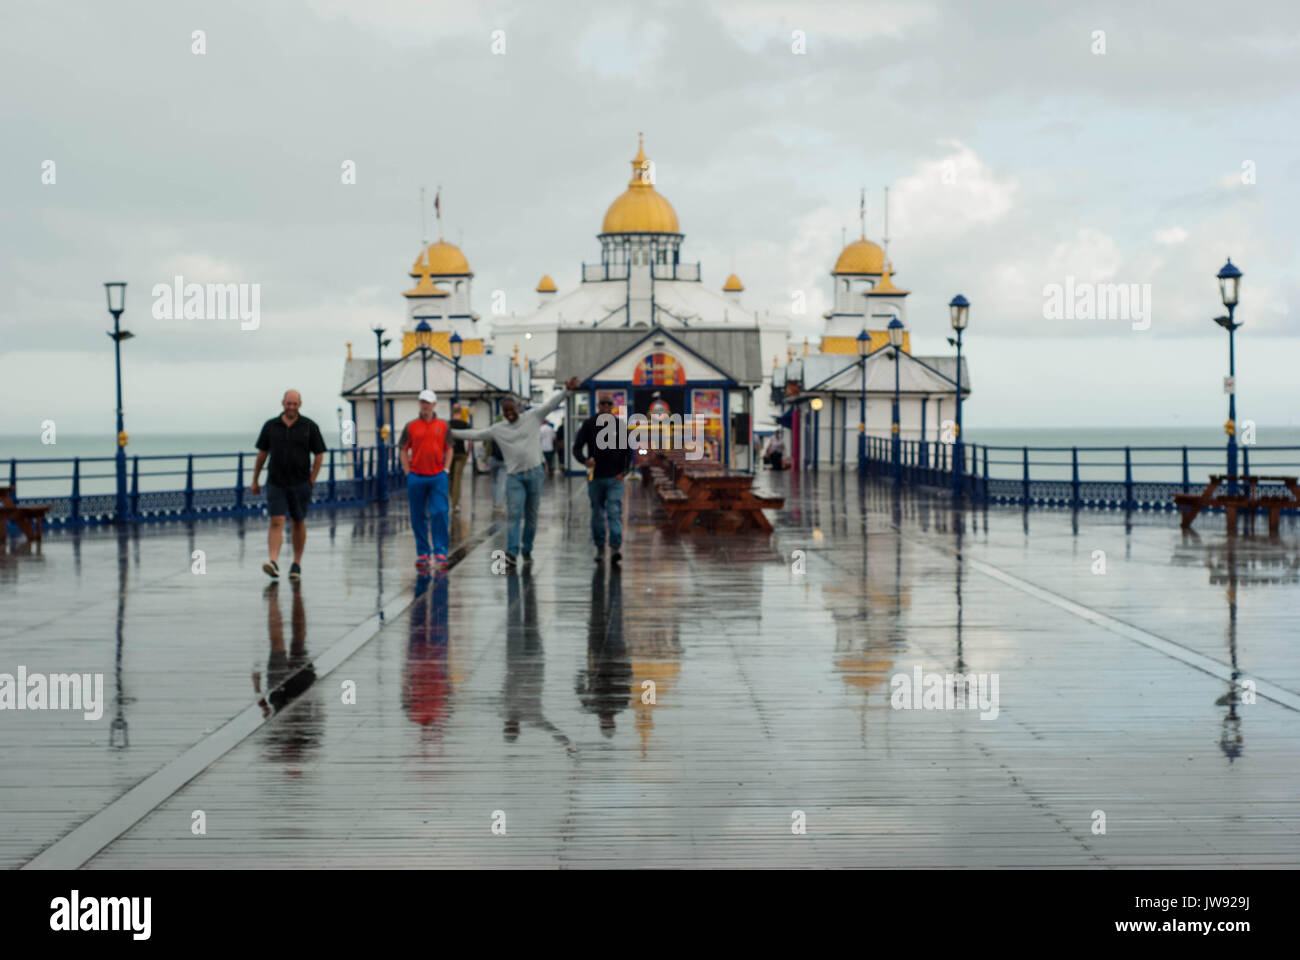 A series of photographs based on Eastbourne Pier, through sunshine and rain. A typical British summer's day with colours, reflections and people. Stock Photo